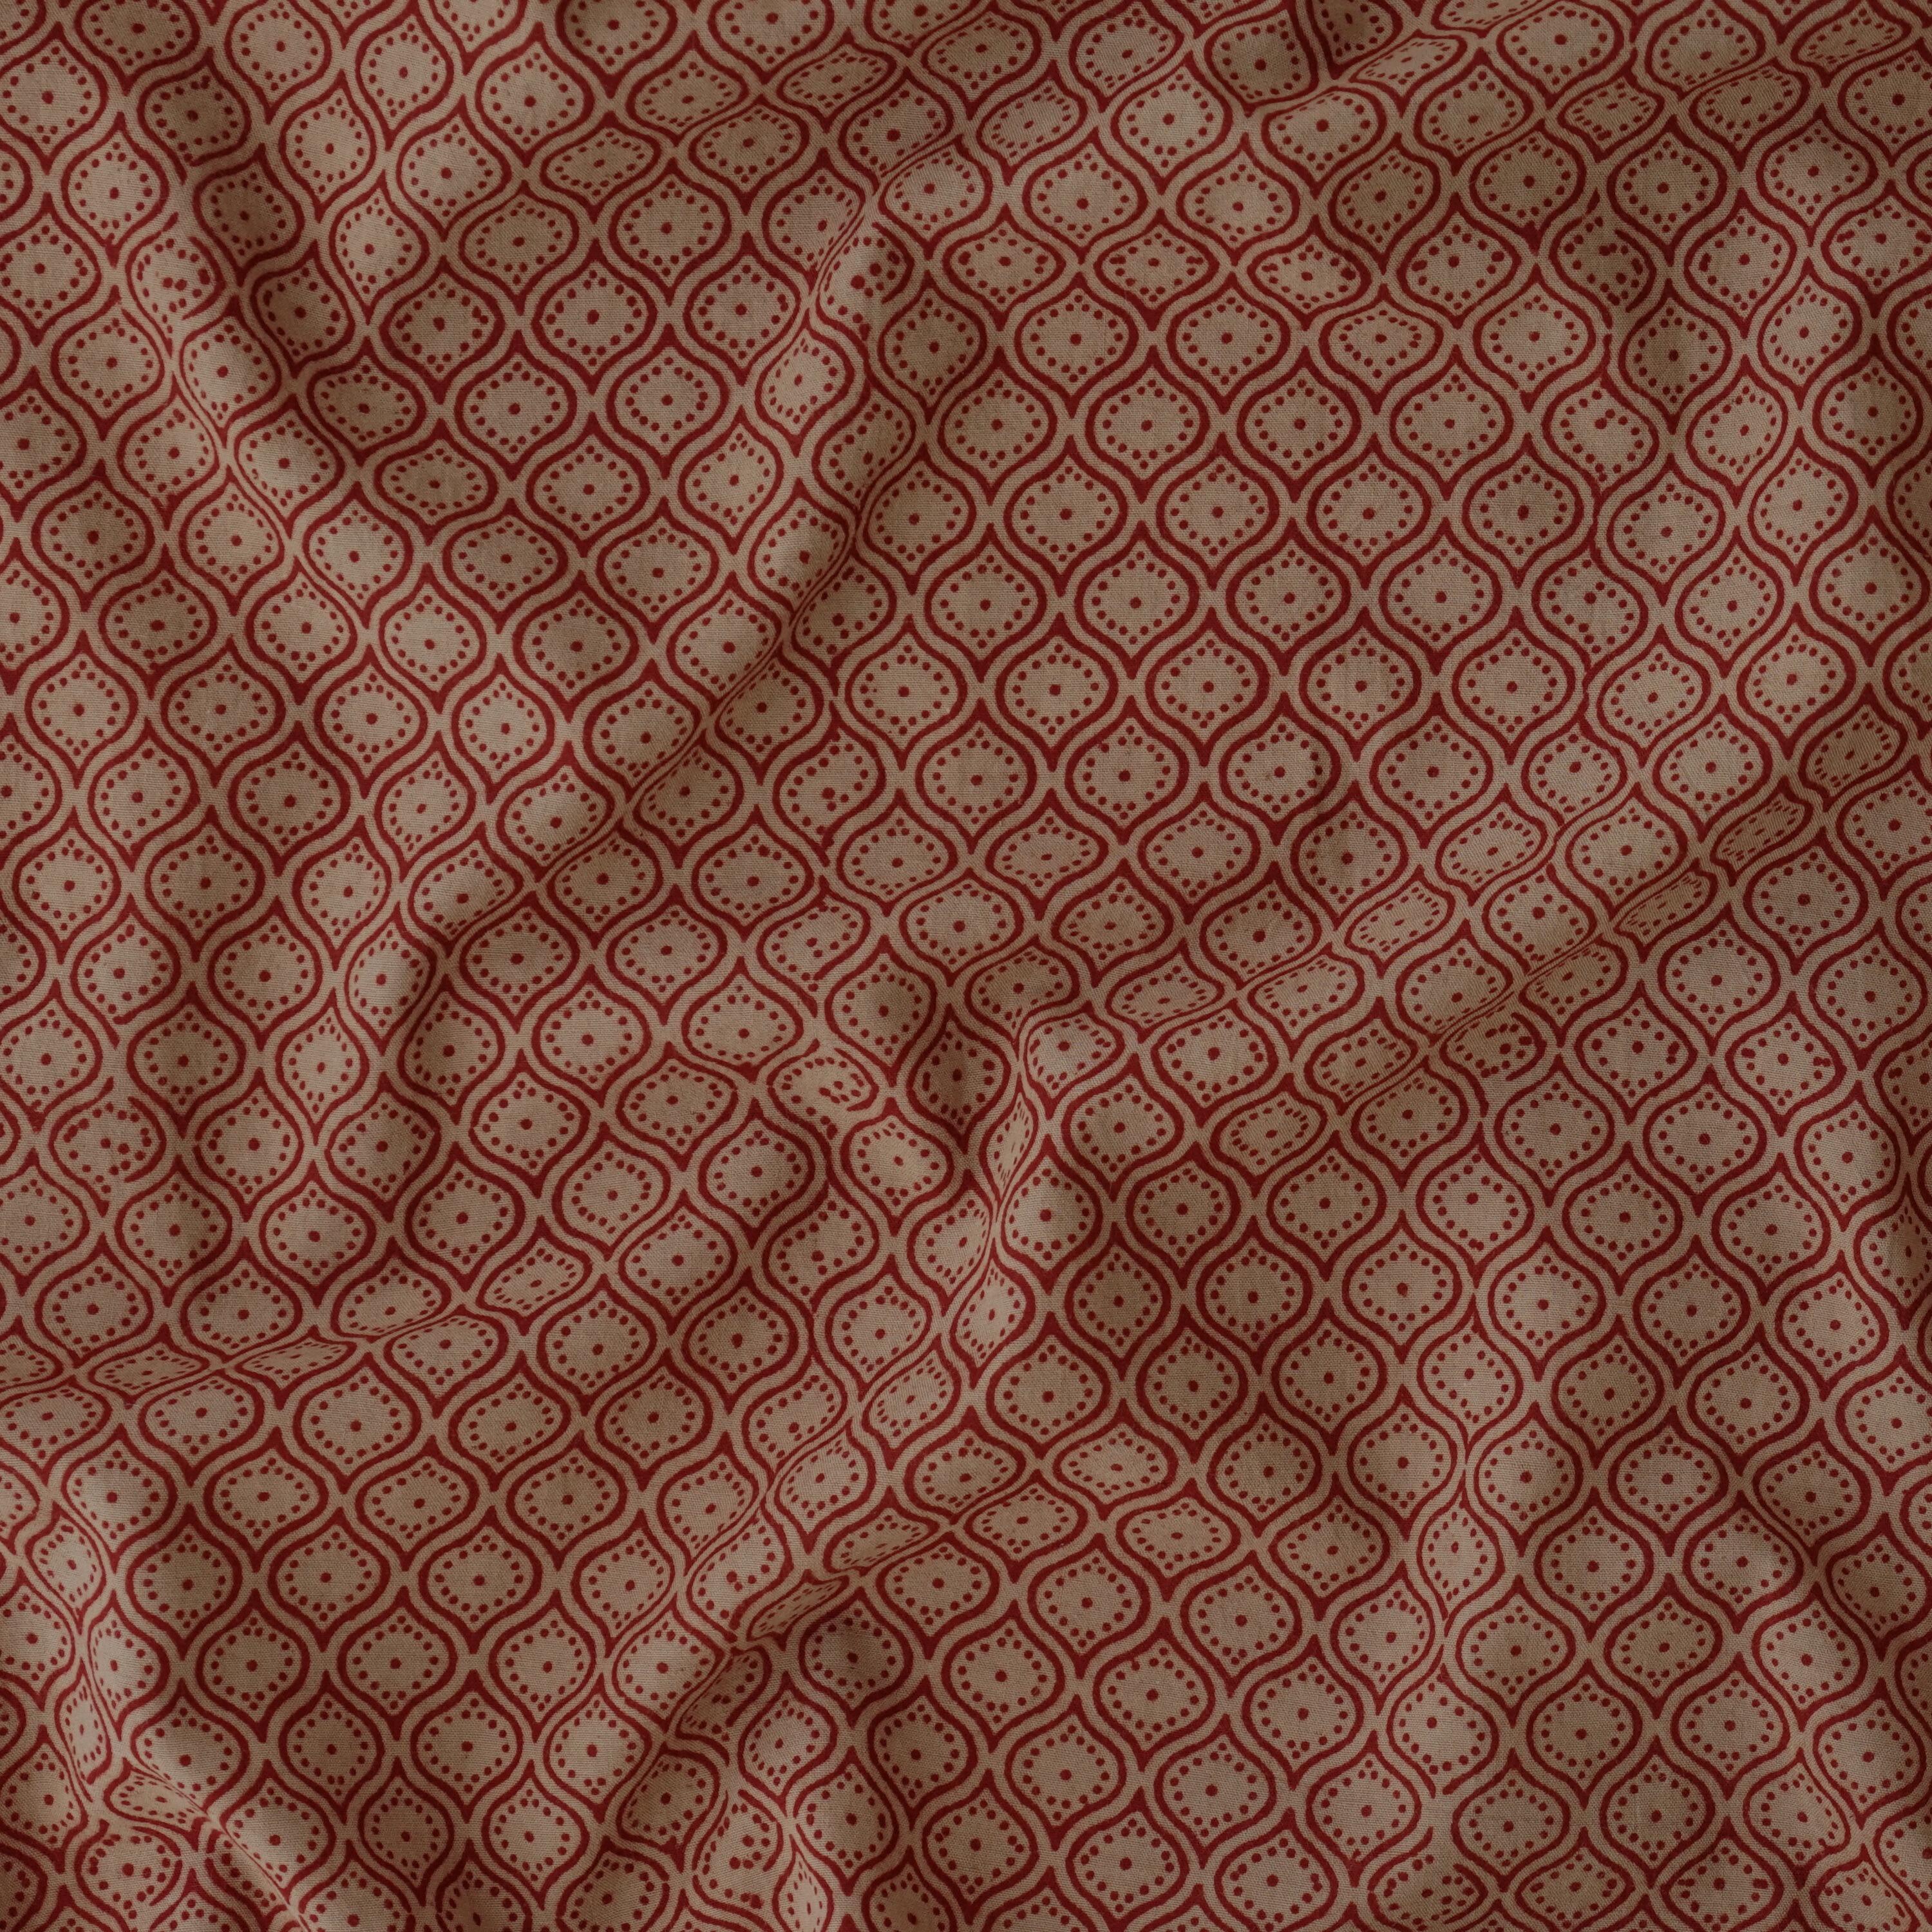 100% Block-Printed Cotton Fabric From India- Bagh - Alizarin Red & Indigosol Khaki - Moreish Dops Print - Contrast